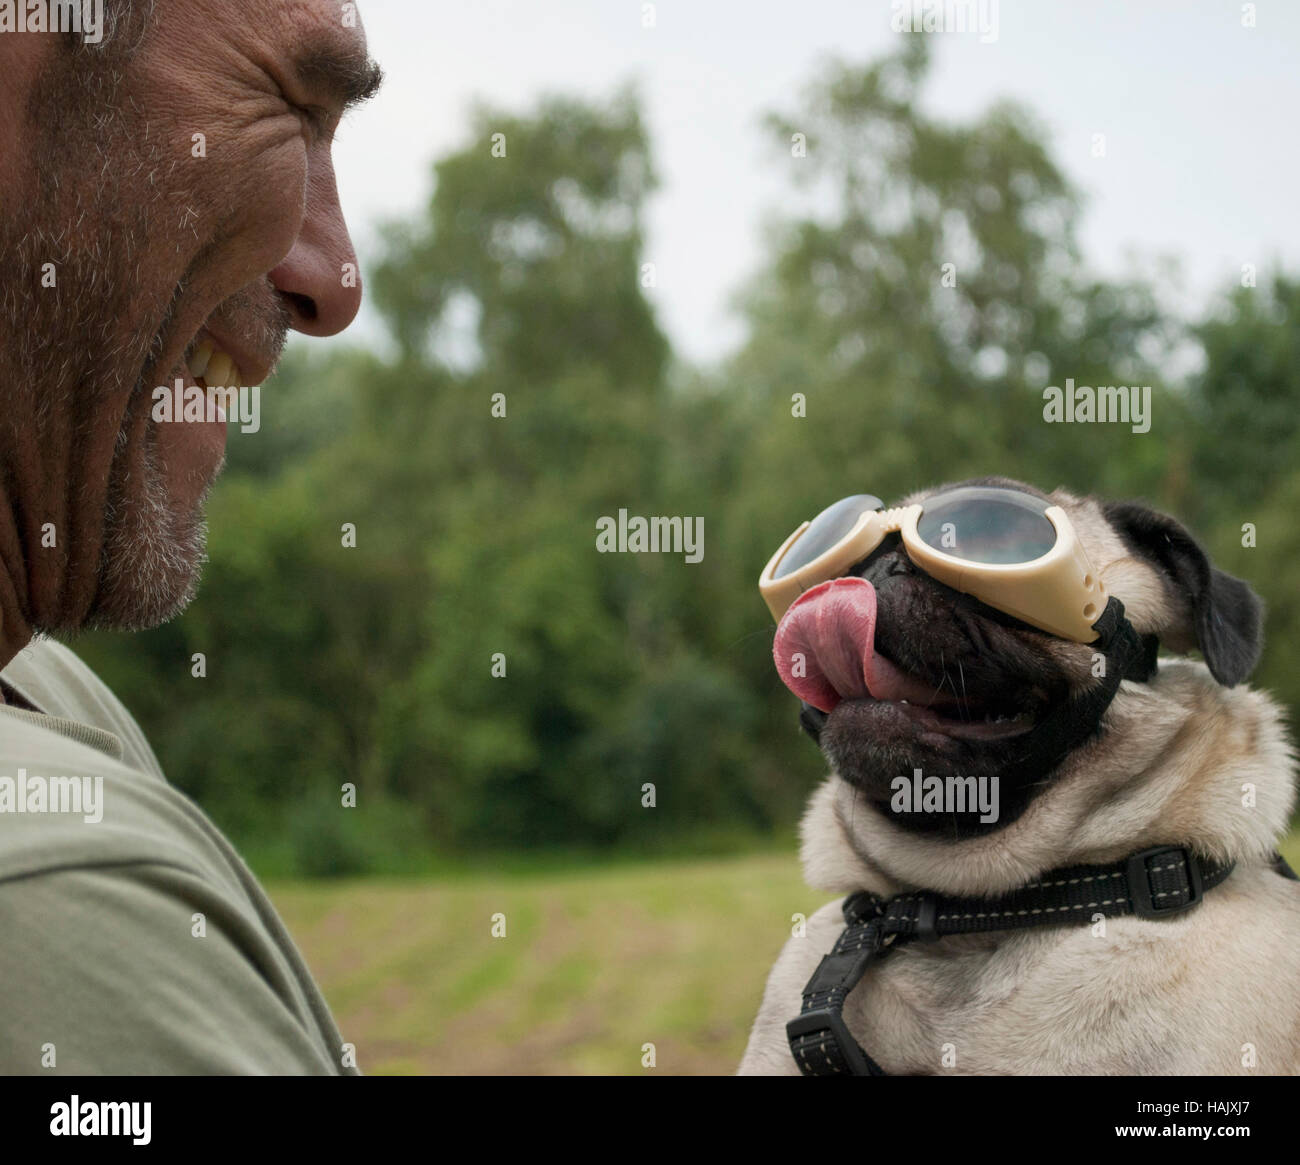 man, adult male, is having fun with pug puppy wearing dog goggles, outside in park Stock Photo